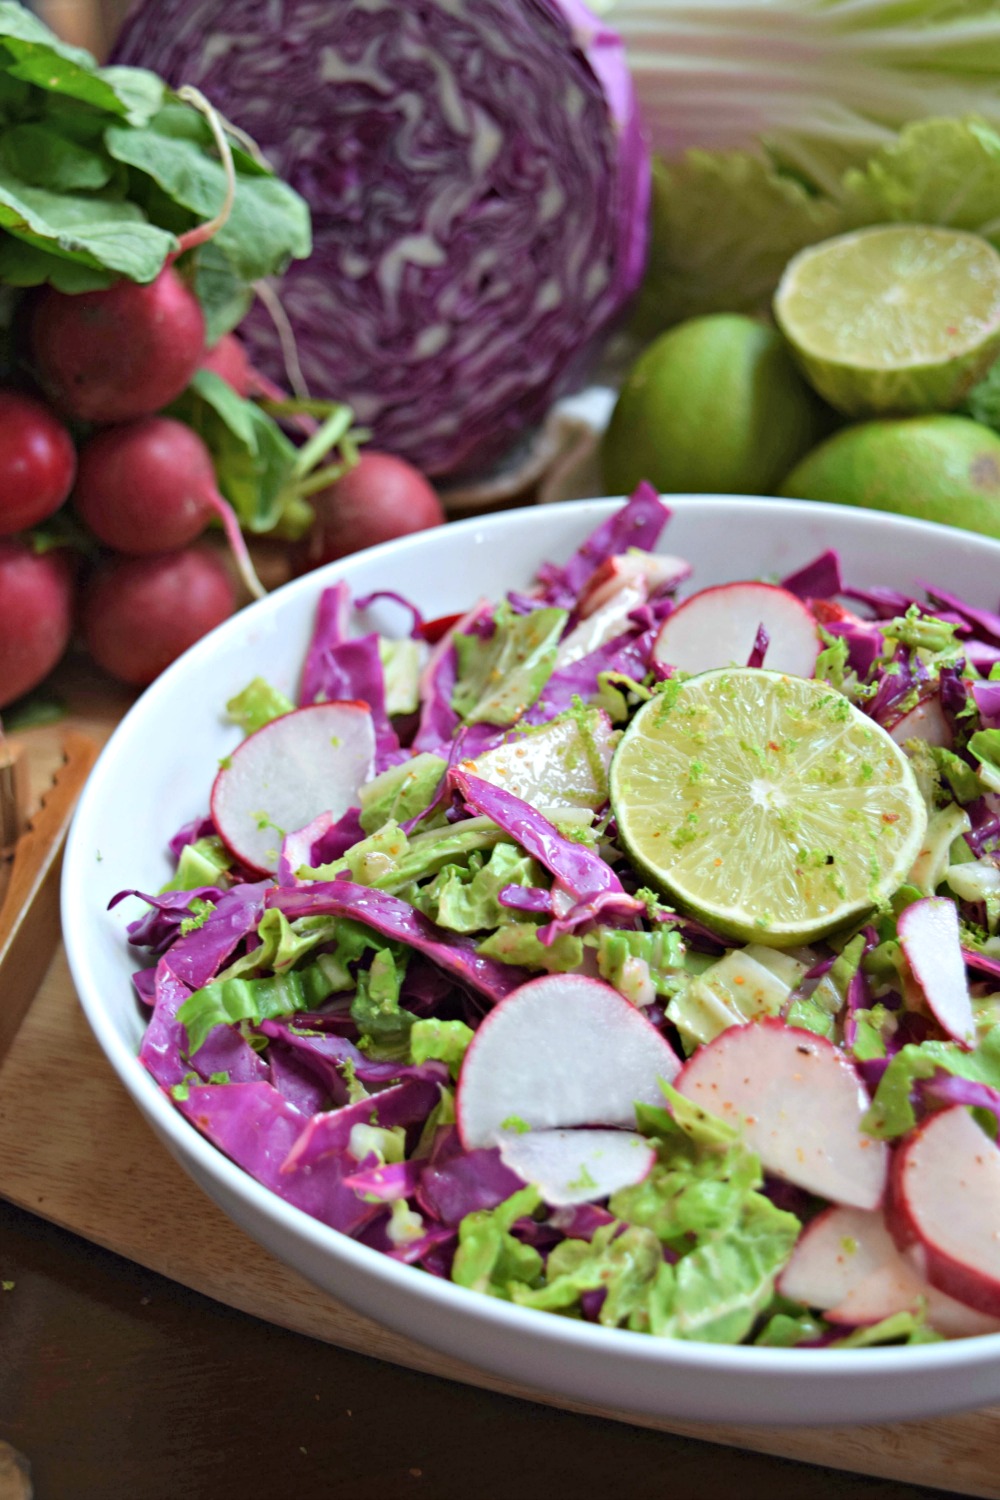 The perfect pairing with seafood or grilled chicken (or even as a salad alone), this colorful coleslaw featuring cabbage, jicama and radishes is a quick fix and easy side dish.